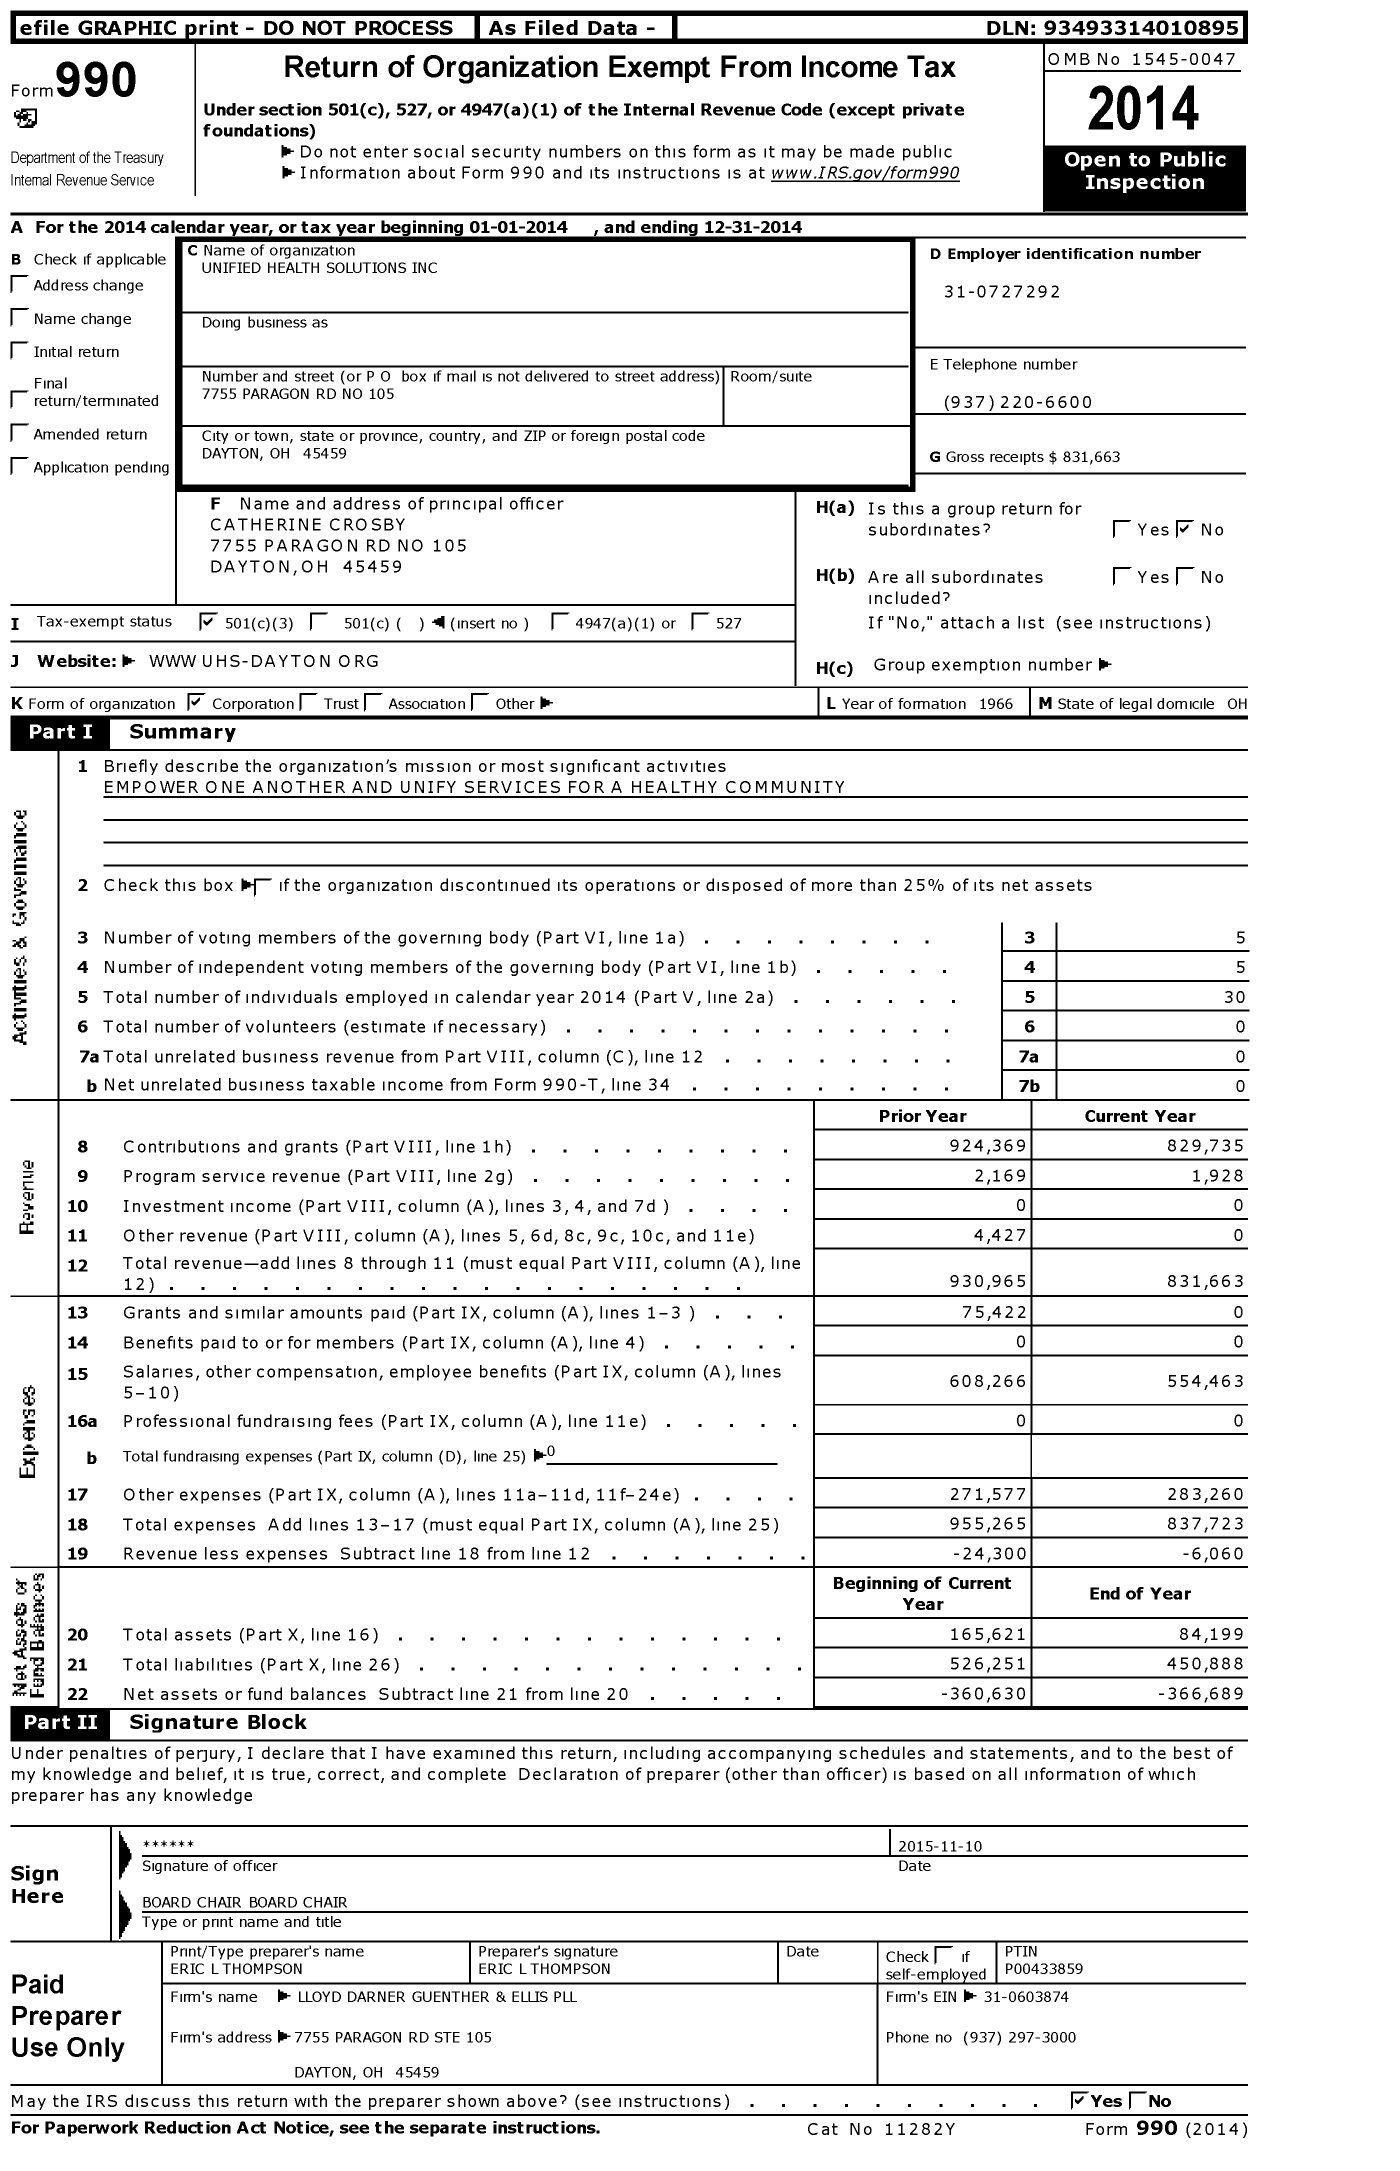 Image of first page of 2014 Form 990 for Unified Health Solutions